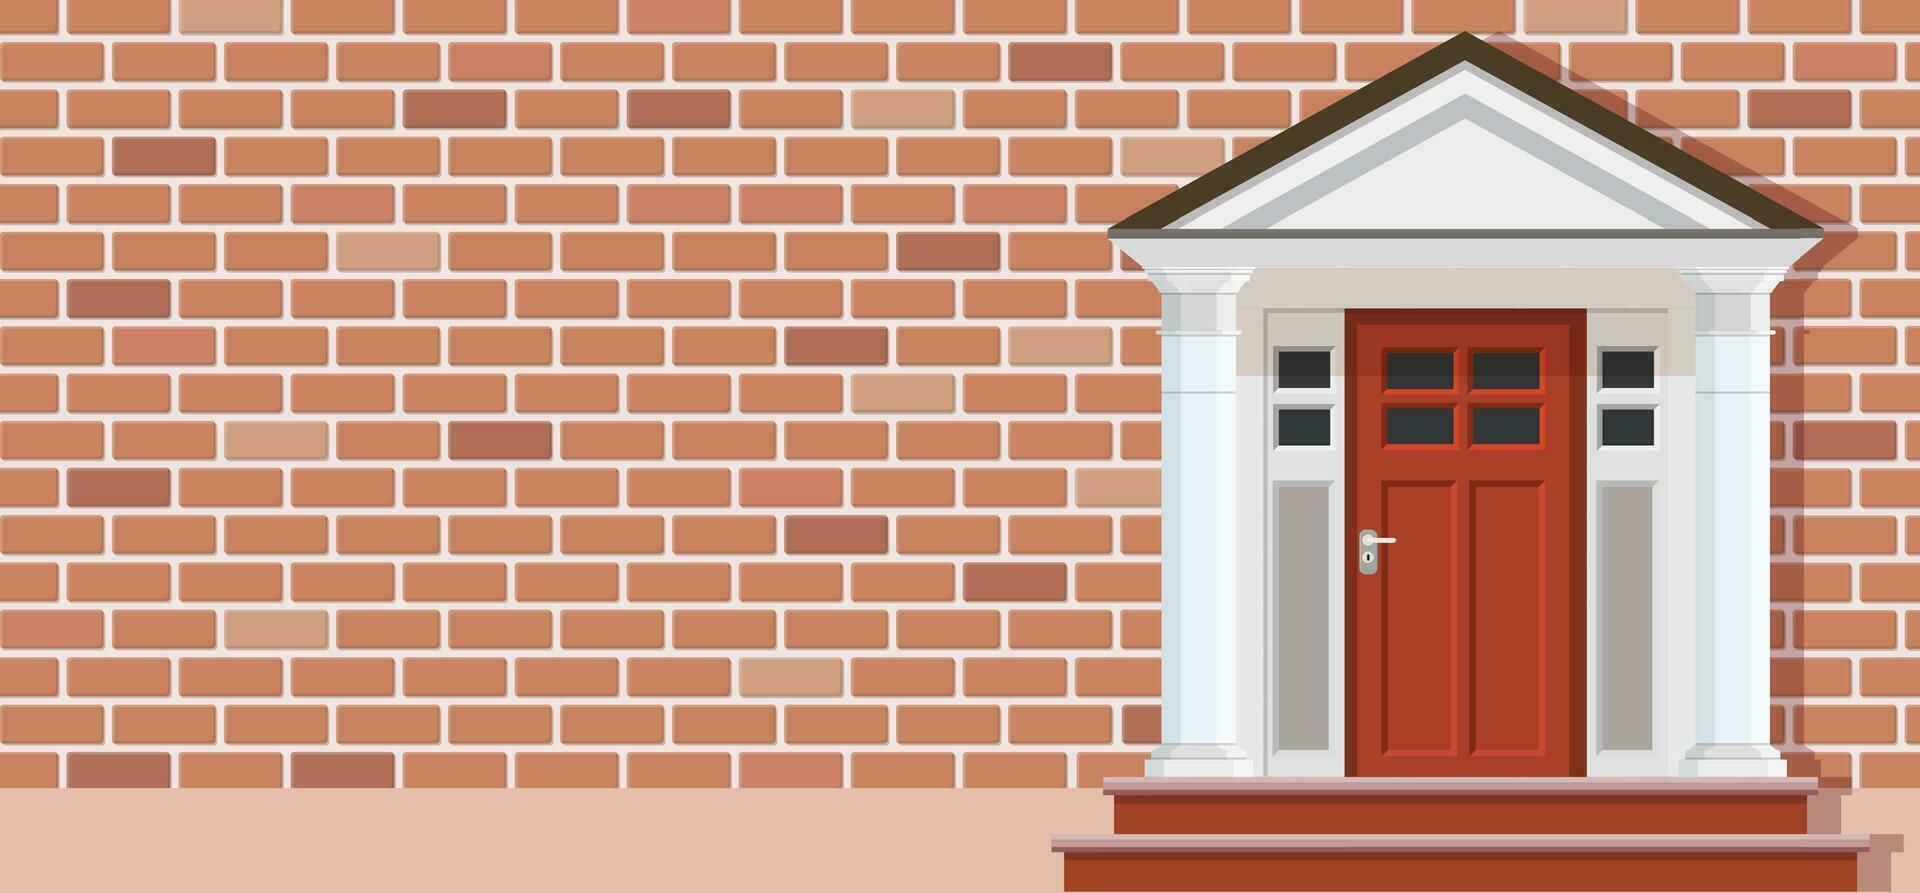 Wooden door of brick house front view, architecture background, building home real estate backdrop. Vector illustration in flat style